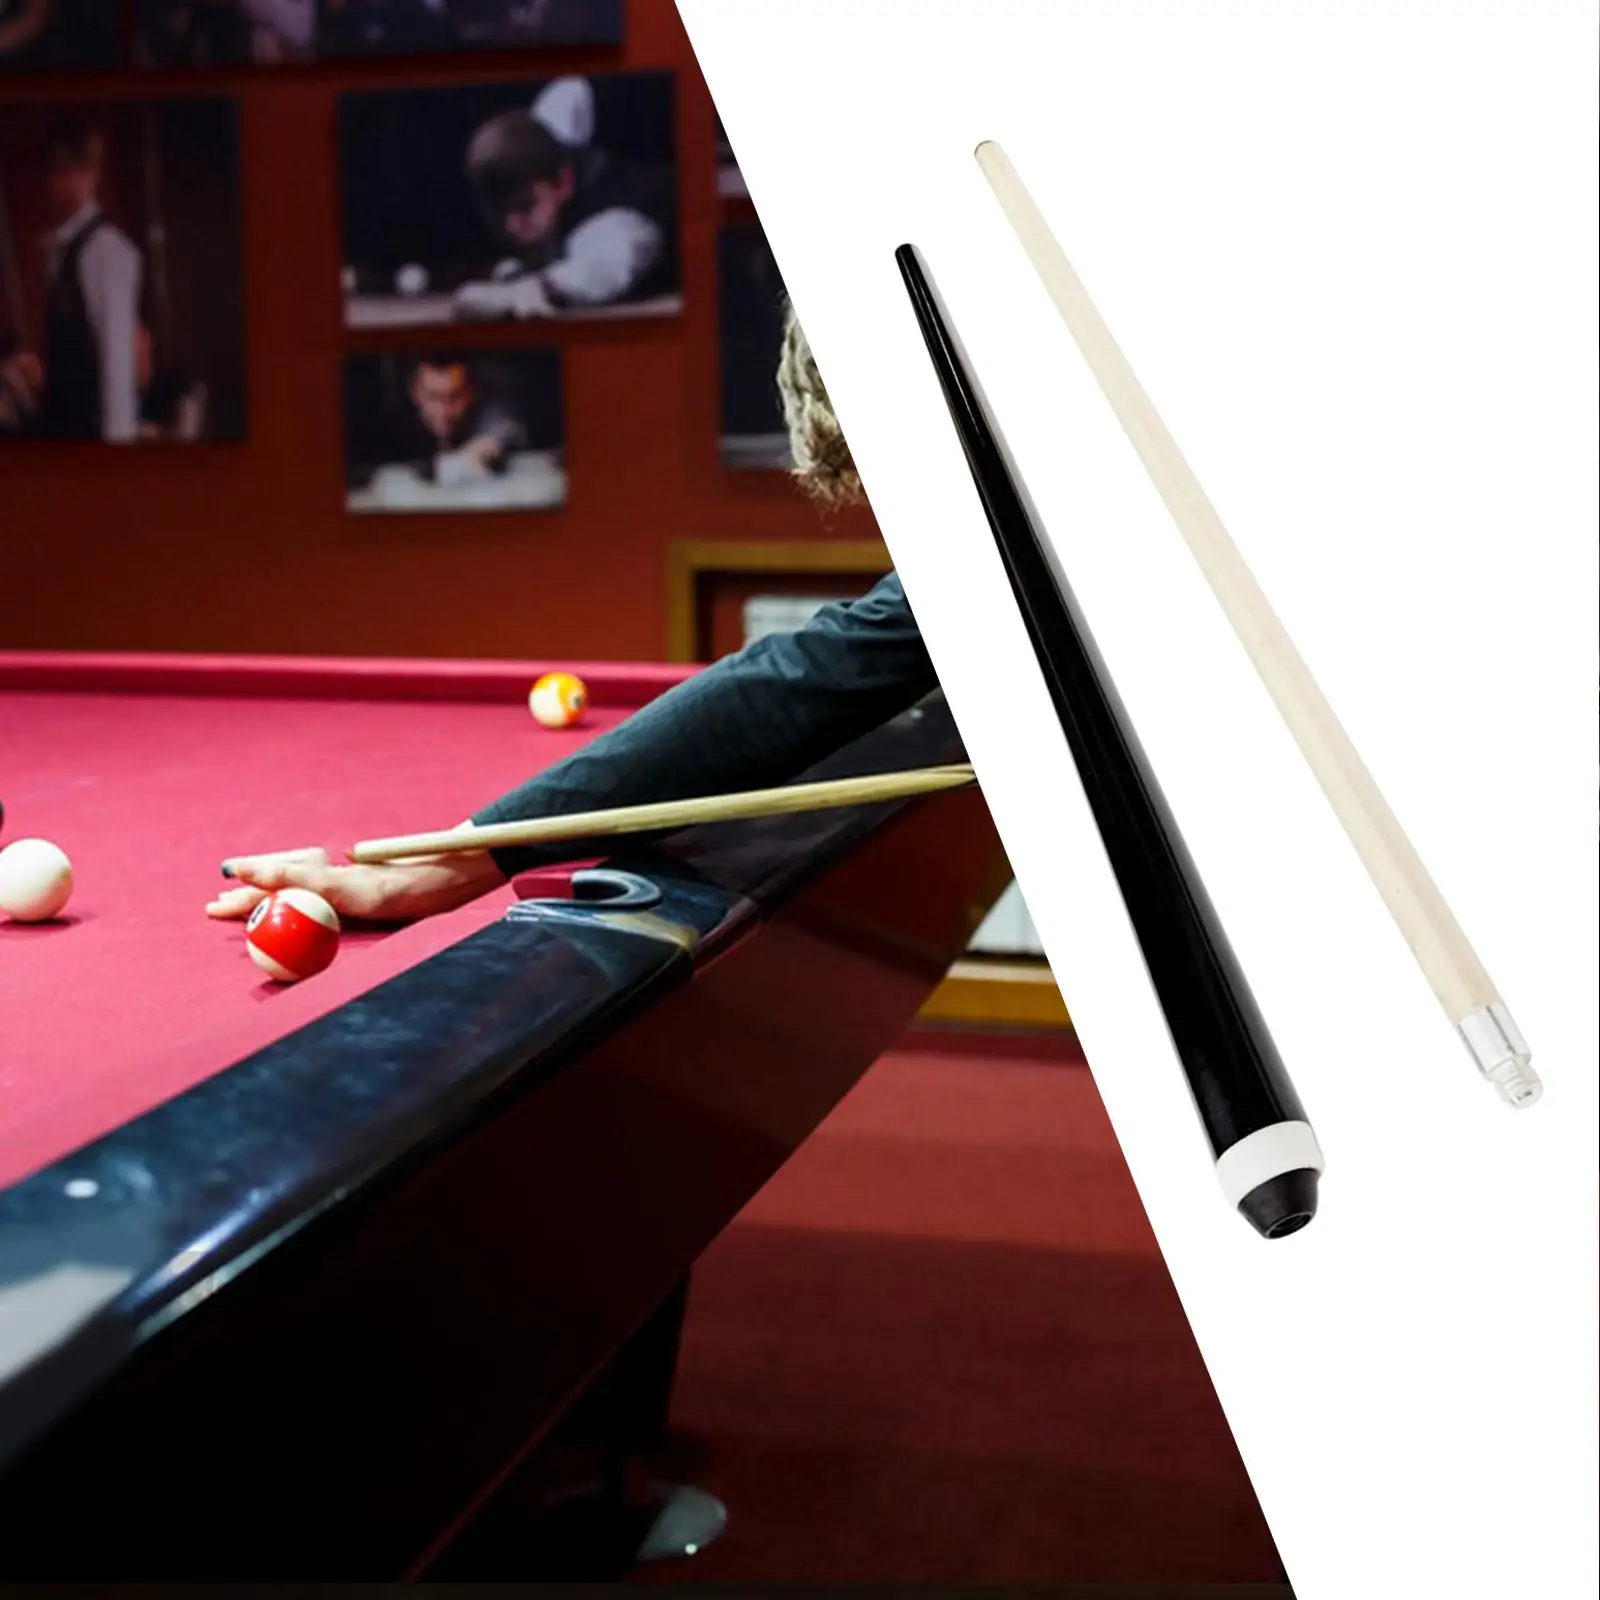 Billiard Pool Cue Stick Wood Pool Table Sticks for Game Competition Training